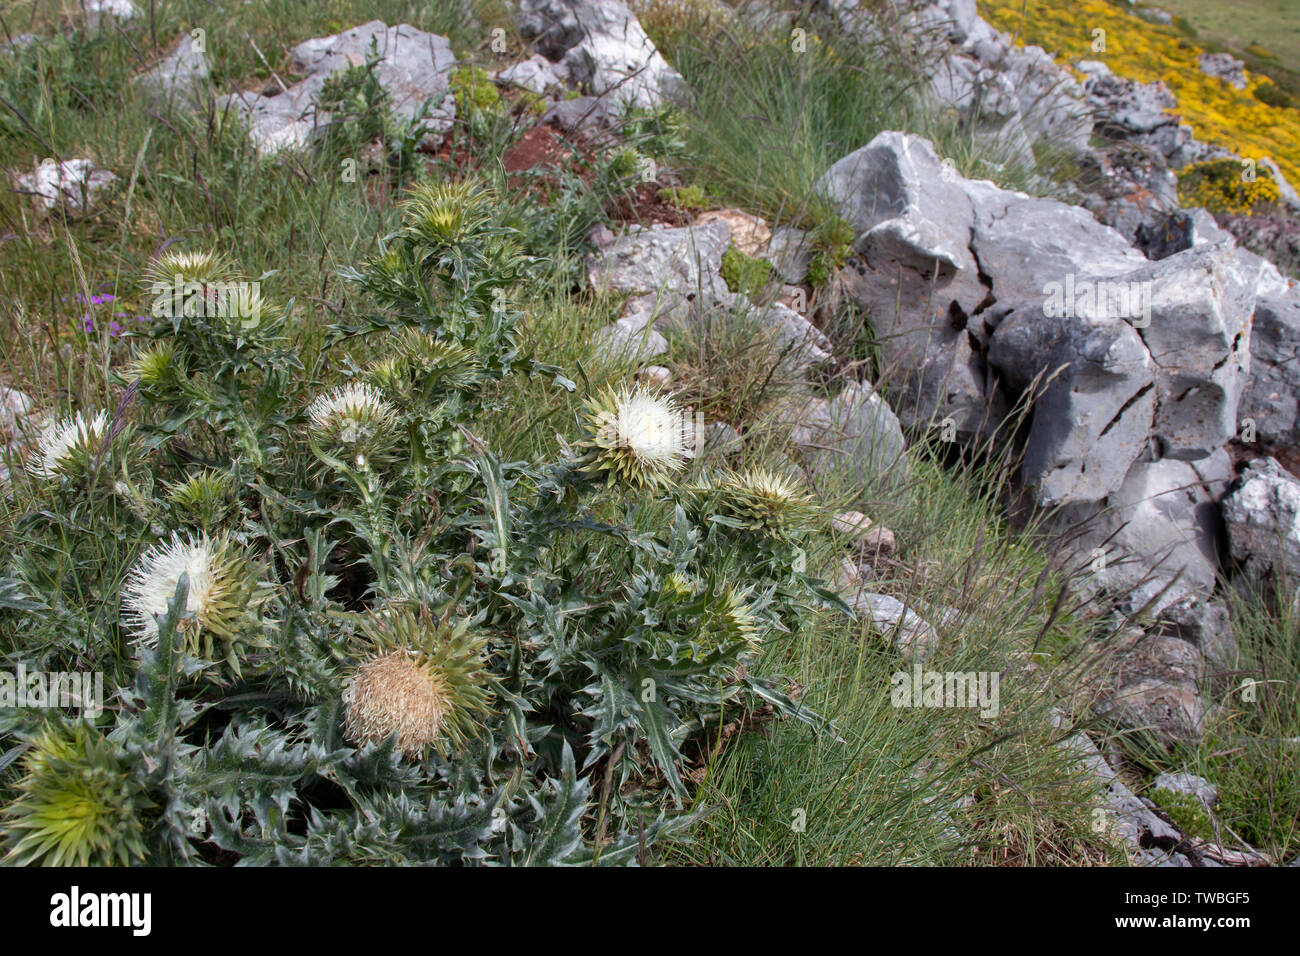 Carduus nutans phyllolepis flowering plant with white flowers on the alpine meadow Stock Photo